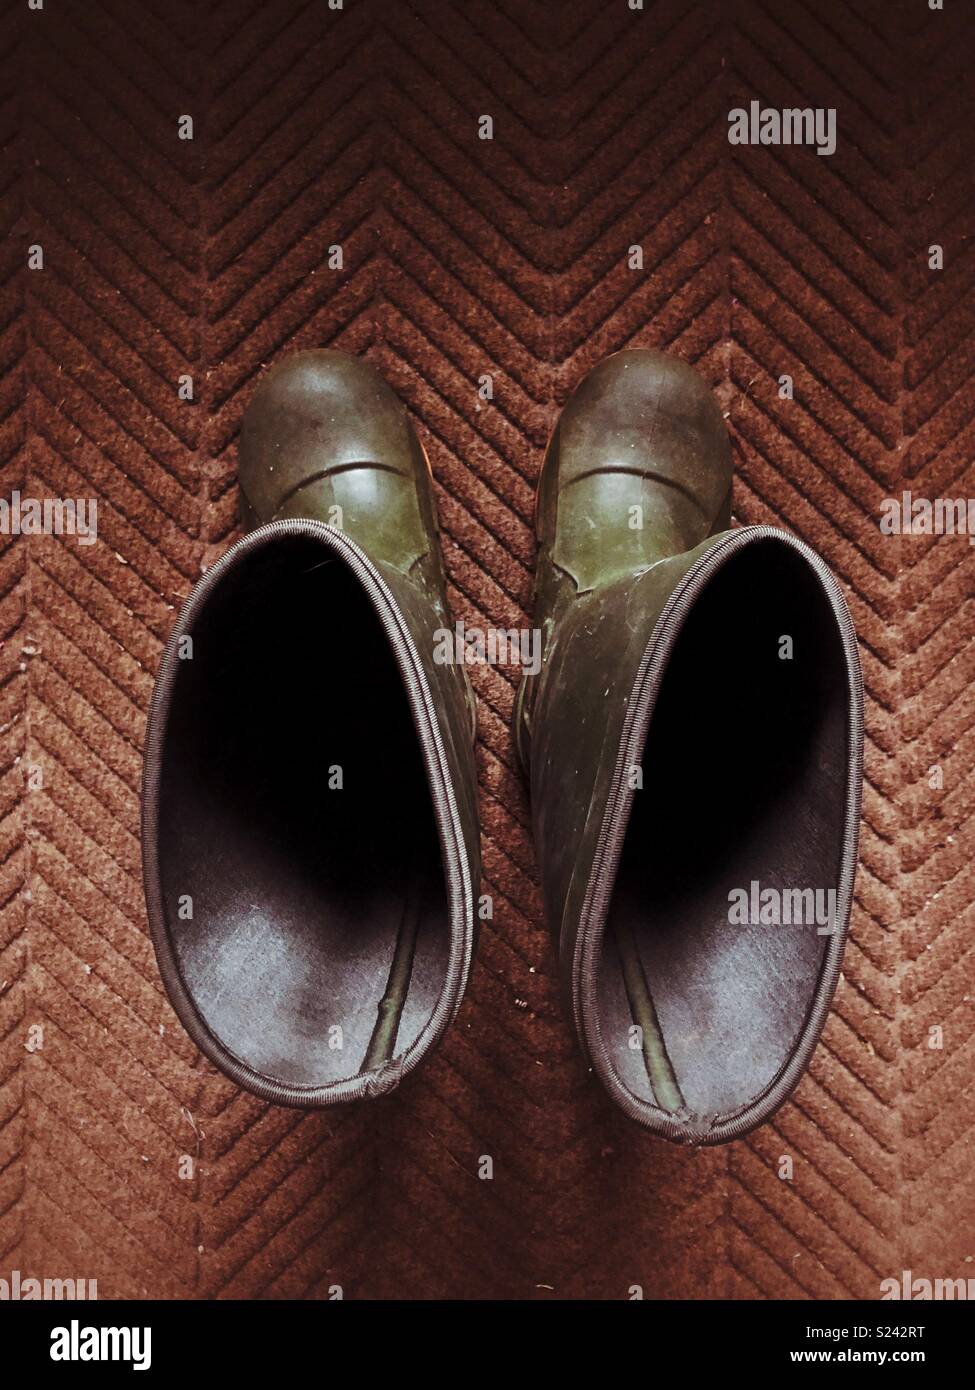 Looking down into empty green Wellington rain boots on a brown floor mat Stock Photo